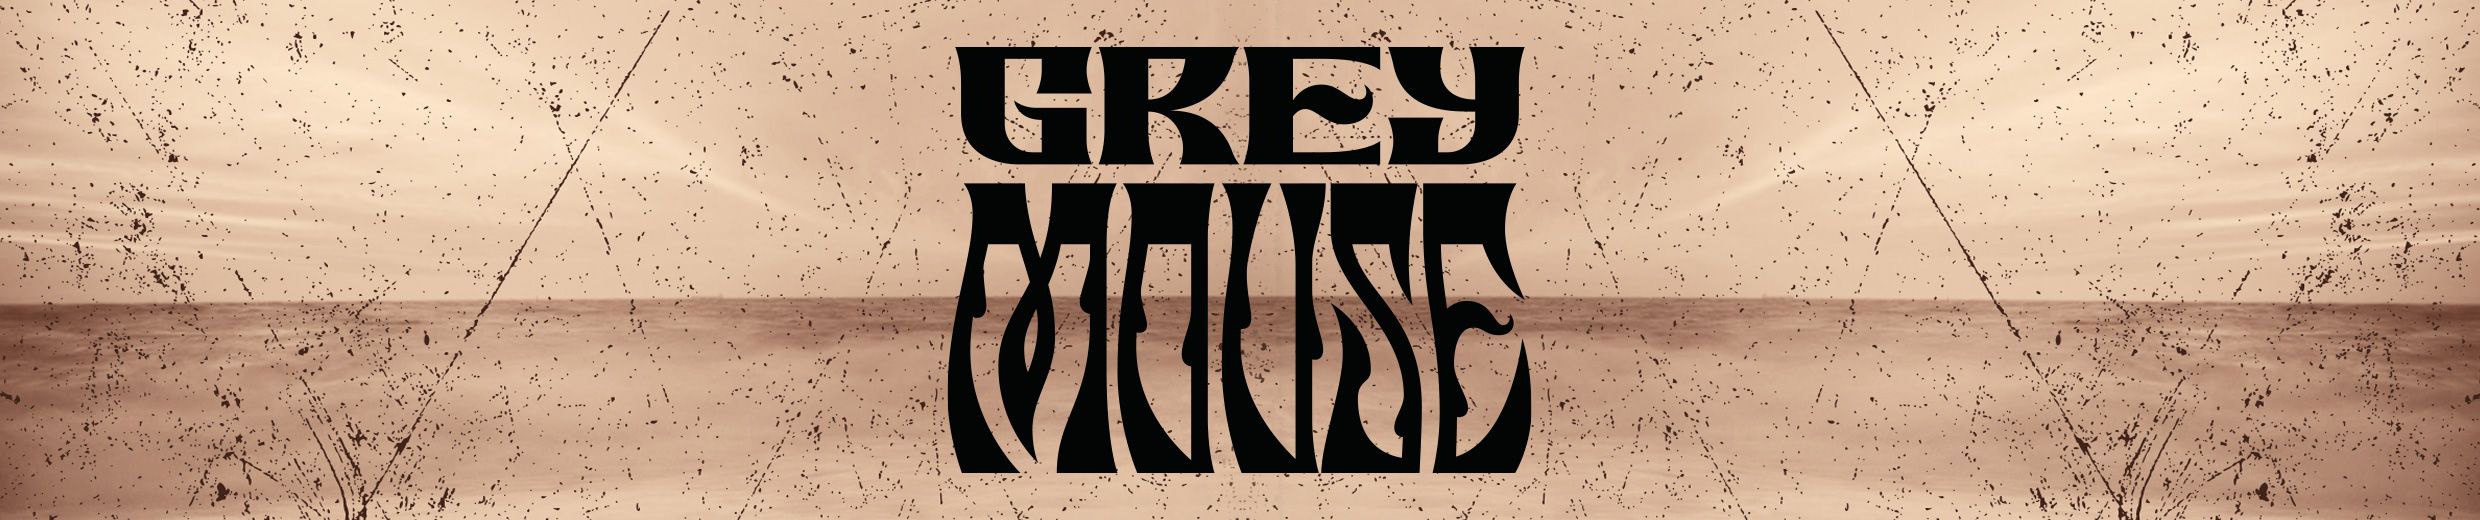 Stream Grey mouse band music Listen to songs, albums, playlists for free on SoundCloud